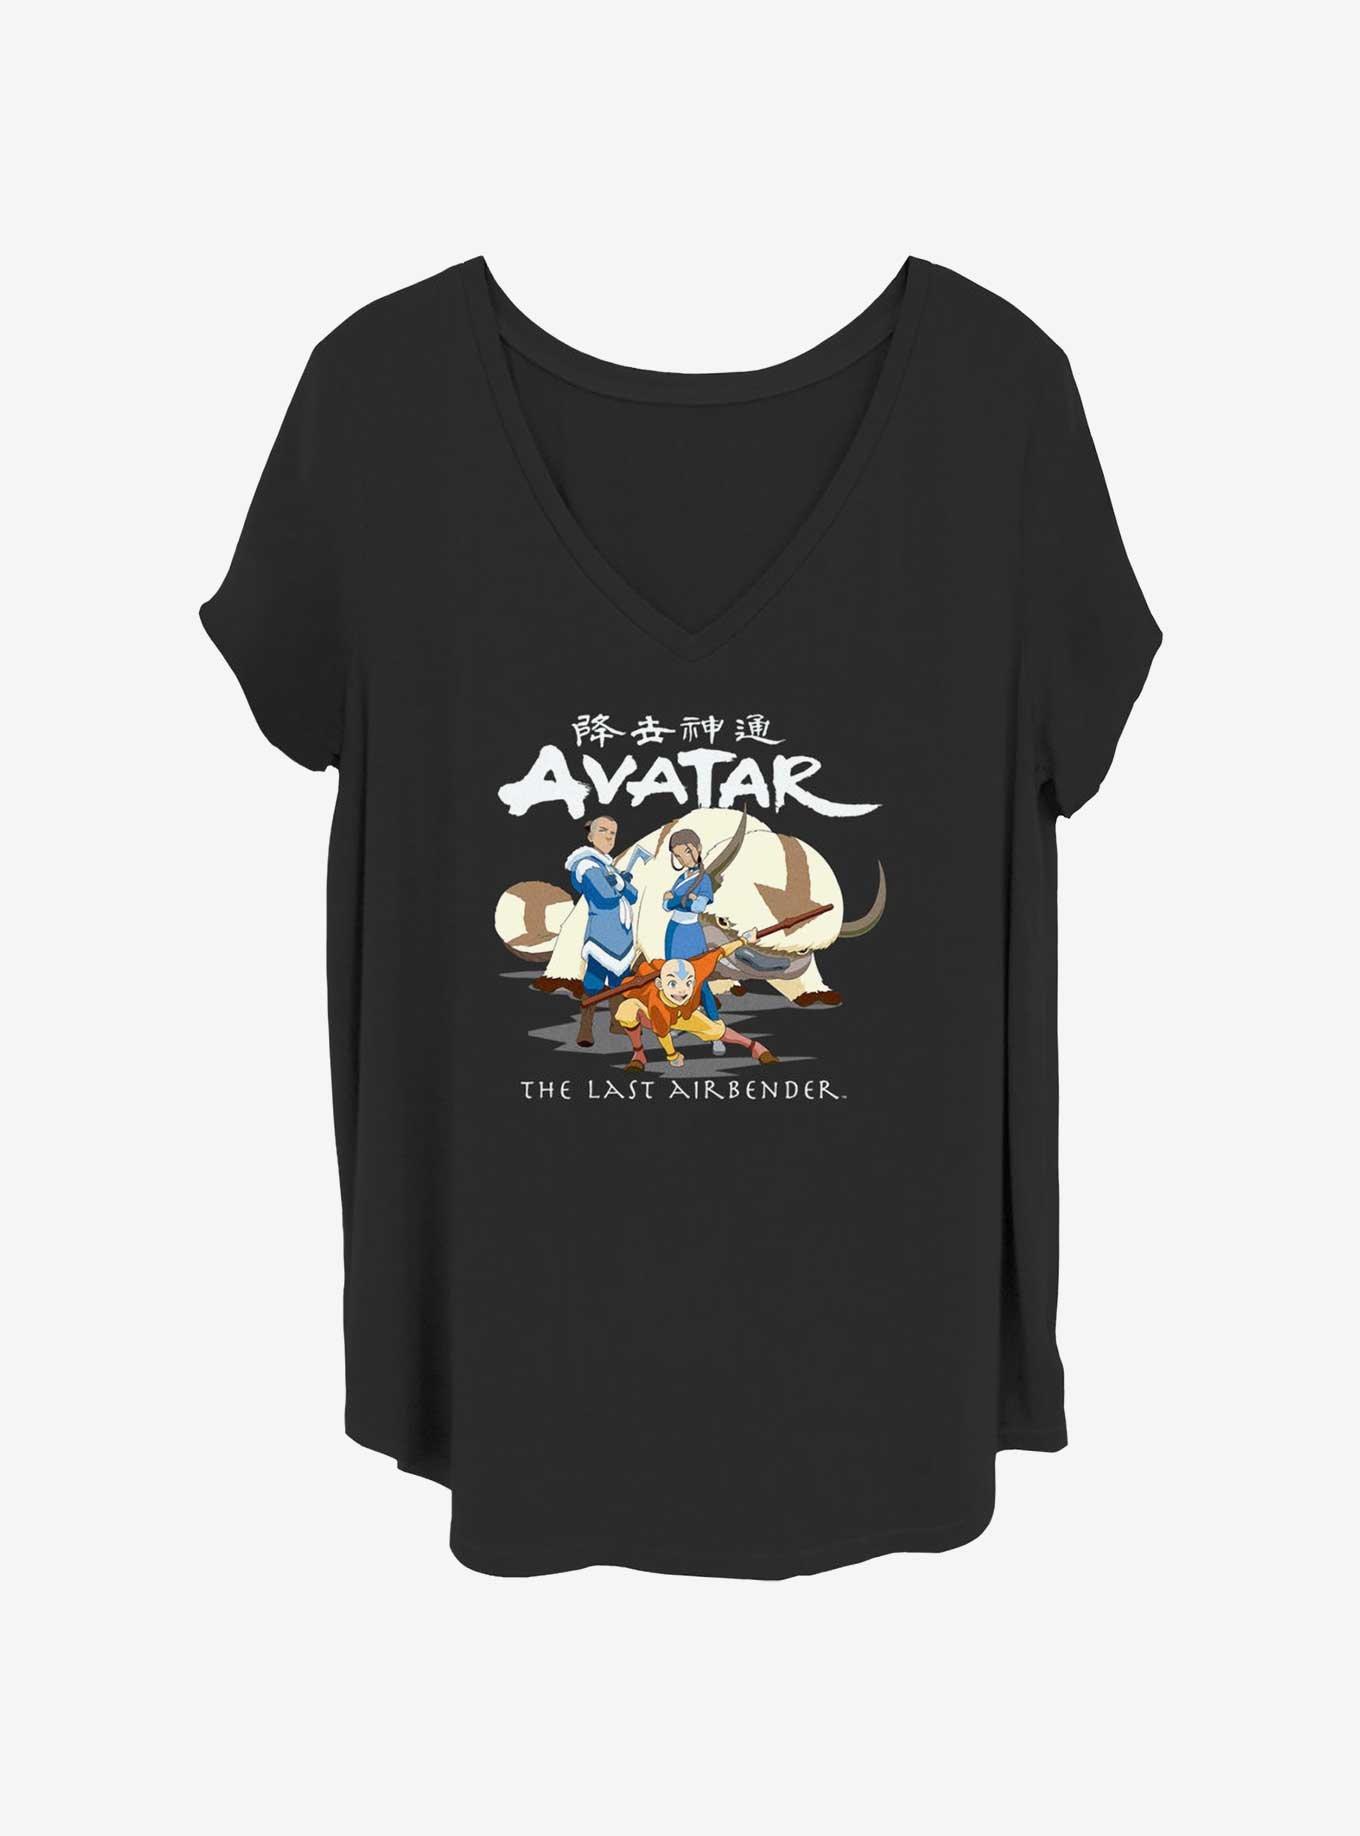 Avatar: The Last Airbender Group Of Four Womens T-Shirt Plus Size, BLACK, hi-res